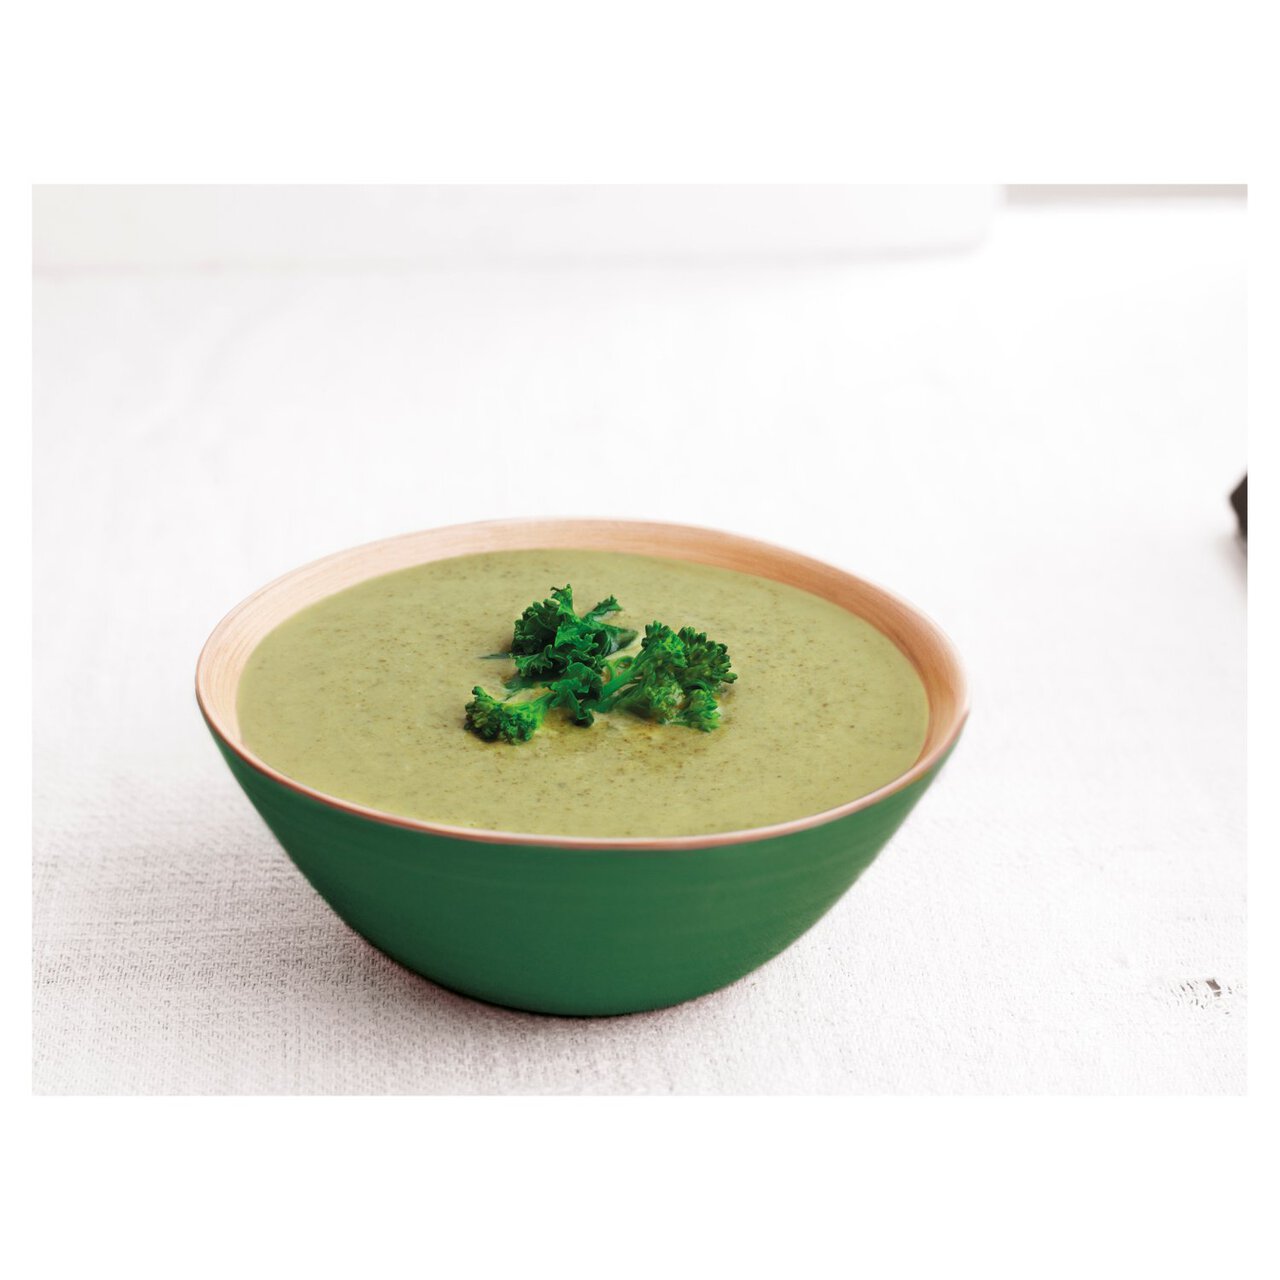 Free & Easy Free From Dairy Free Organic Broccoli & Kale Soup 400g